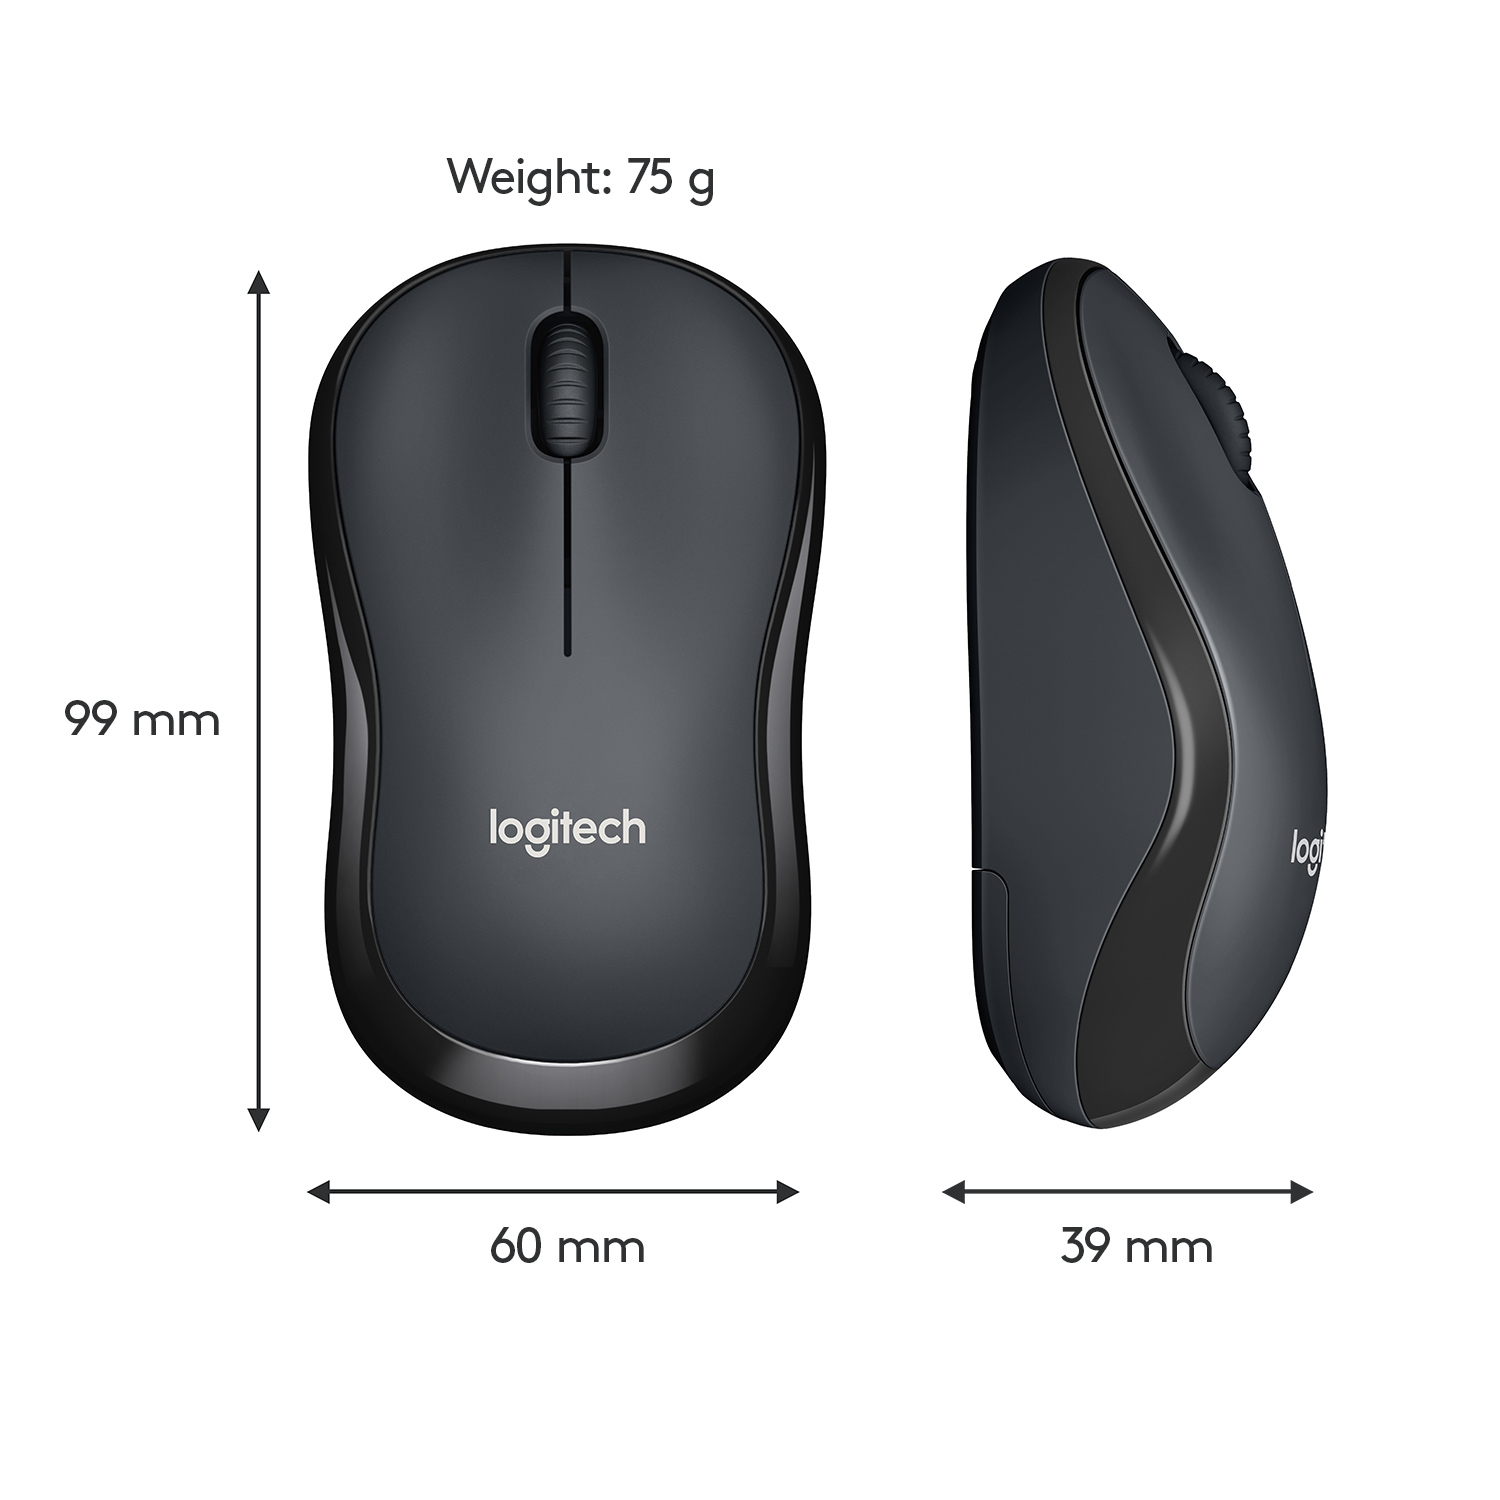 Logitech Silent Wireless Mouse, 2.4 GHz with USB Receiver, 1000 DPI Optical Tracking, Black - image 5 of 9